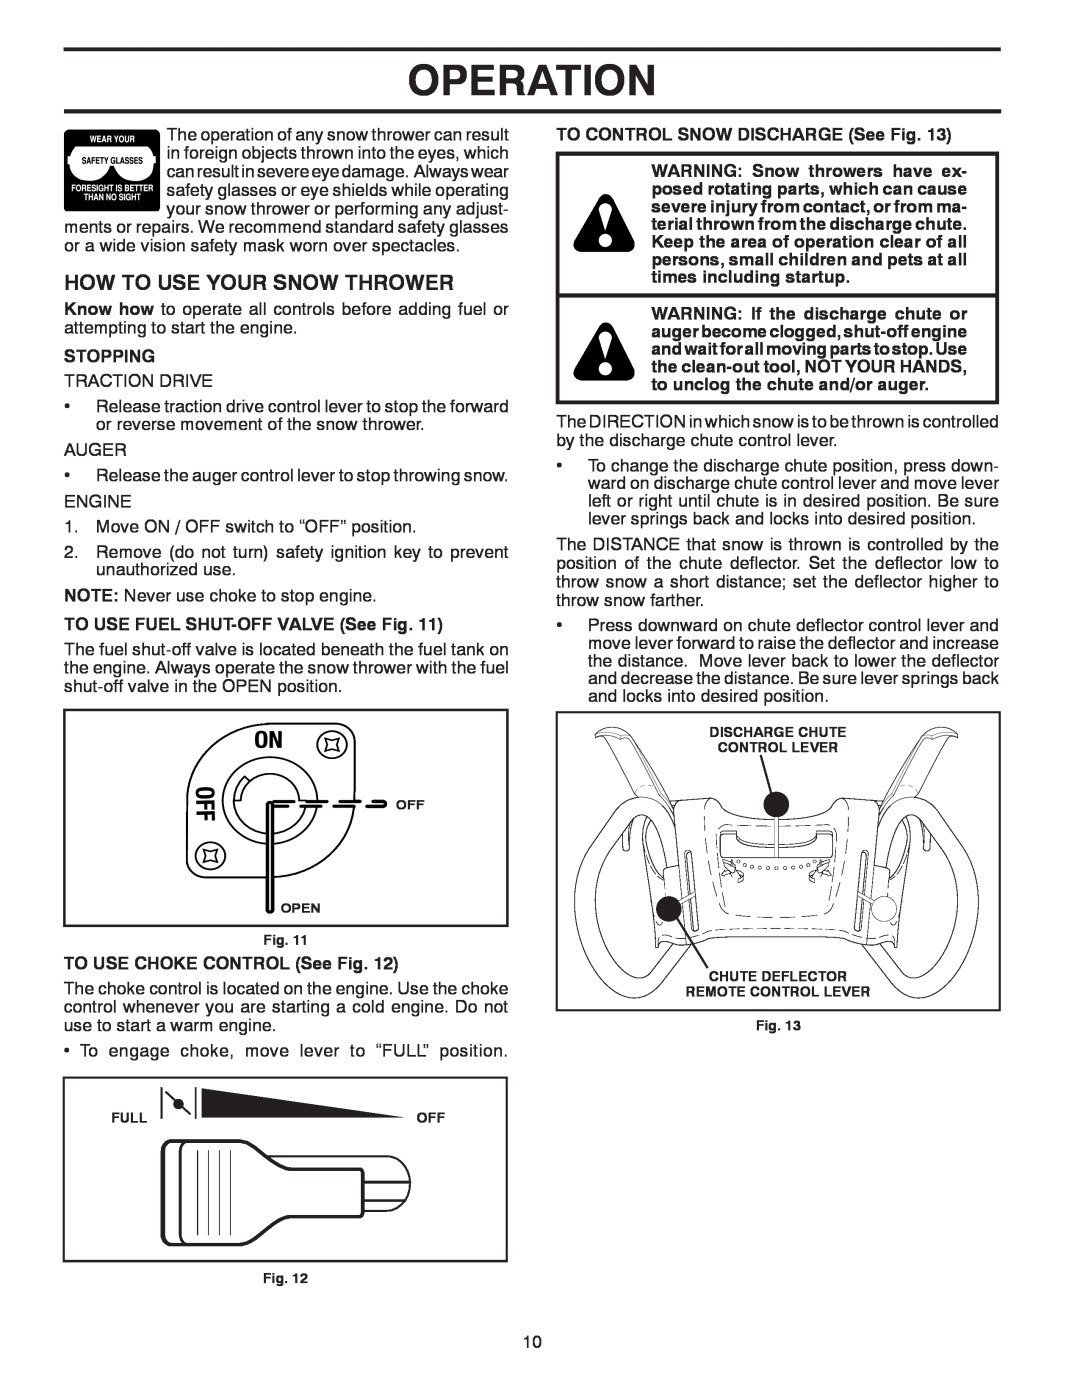 Poulan 96198003600, 435564, PP291E27 How To Use Your Snow Thrower, Operation, Stopping, TO USE FUEL SHUT-OFFVALVE See Fig 